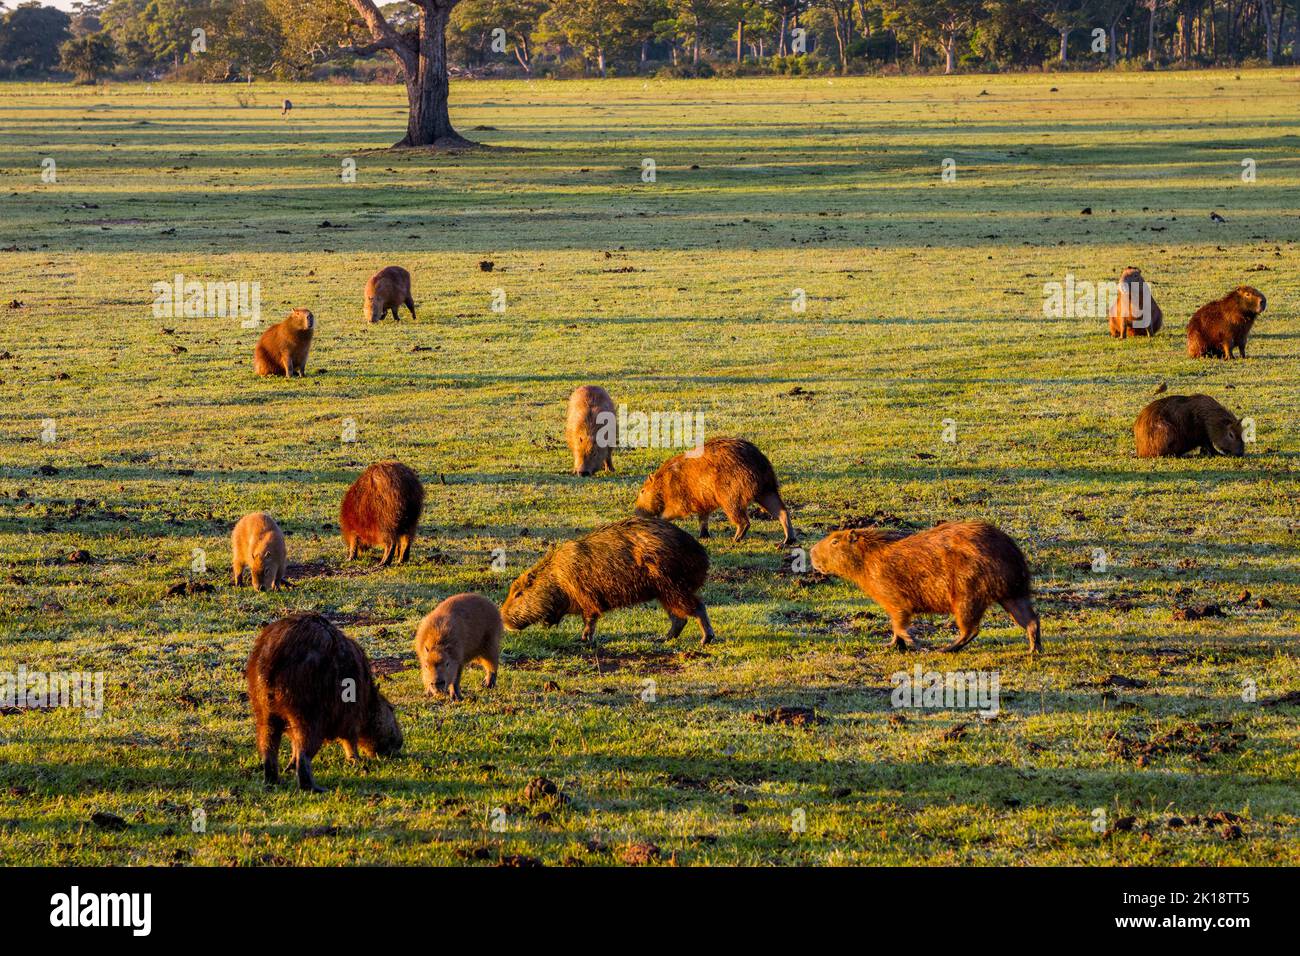 A herd of capybaras (Hydrochoerus hydrochaeris) feeding on grass early morning near the Piuval Lodge in the Northern Pantanal, State of Mato Grosso, B Stock Photo